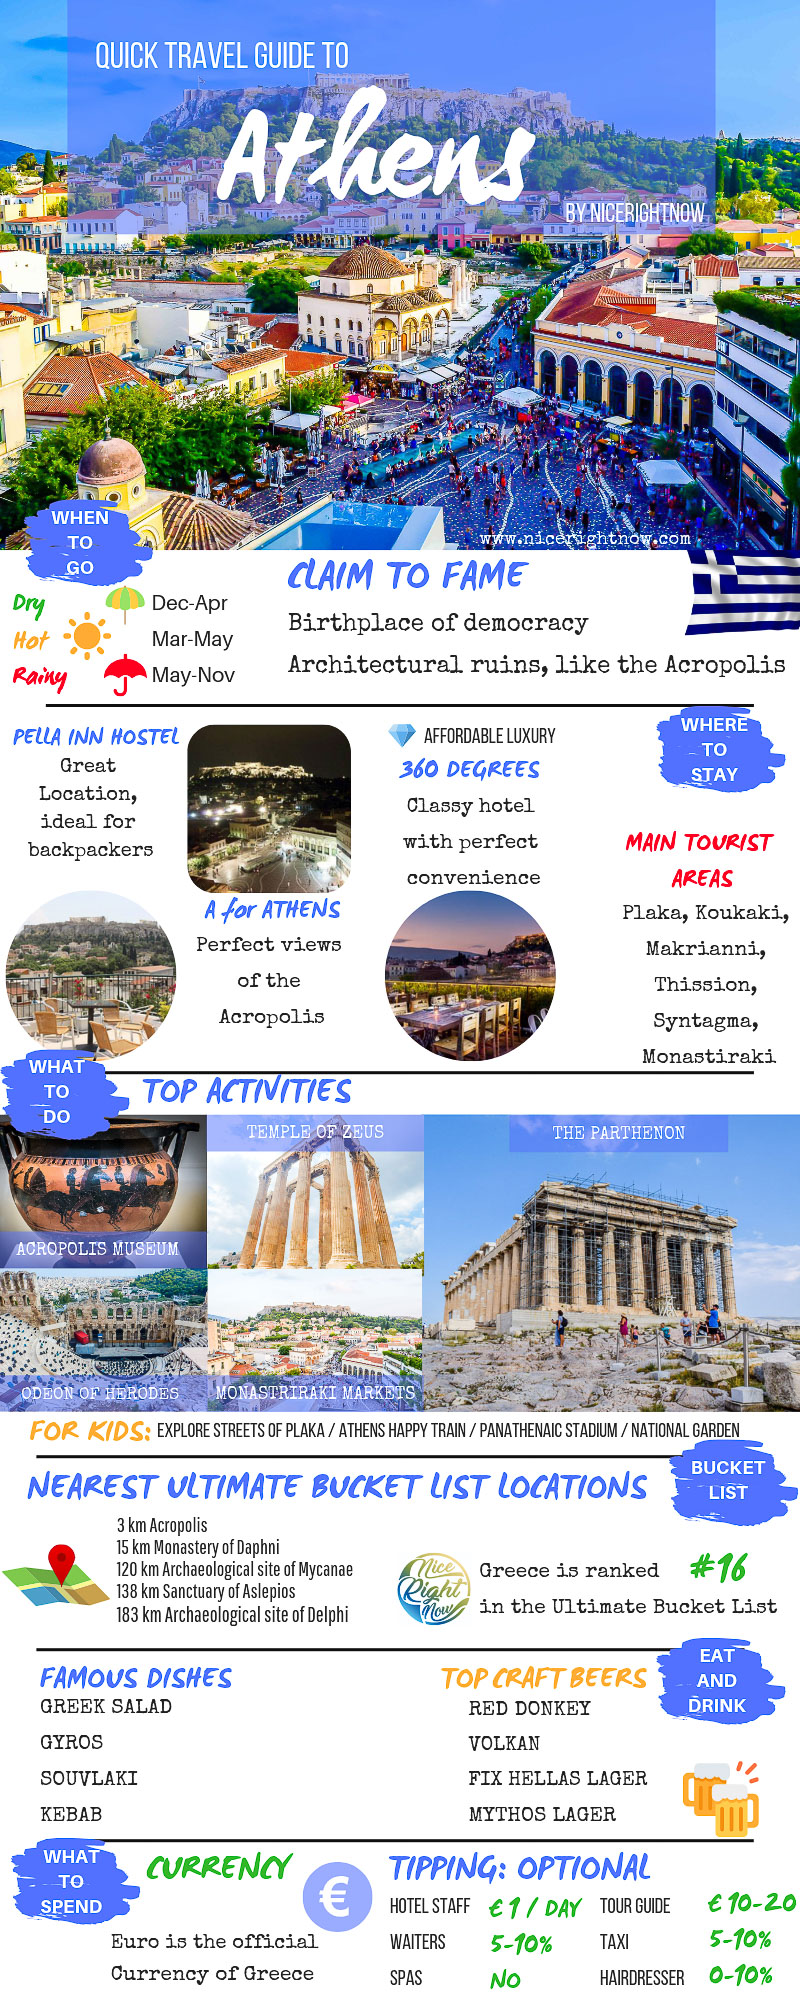 Quick Travel Guide to Athens